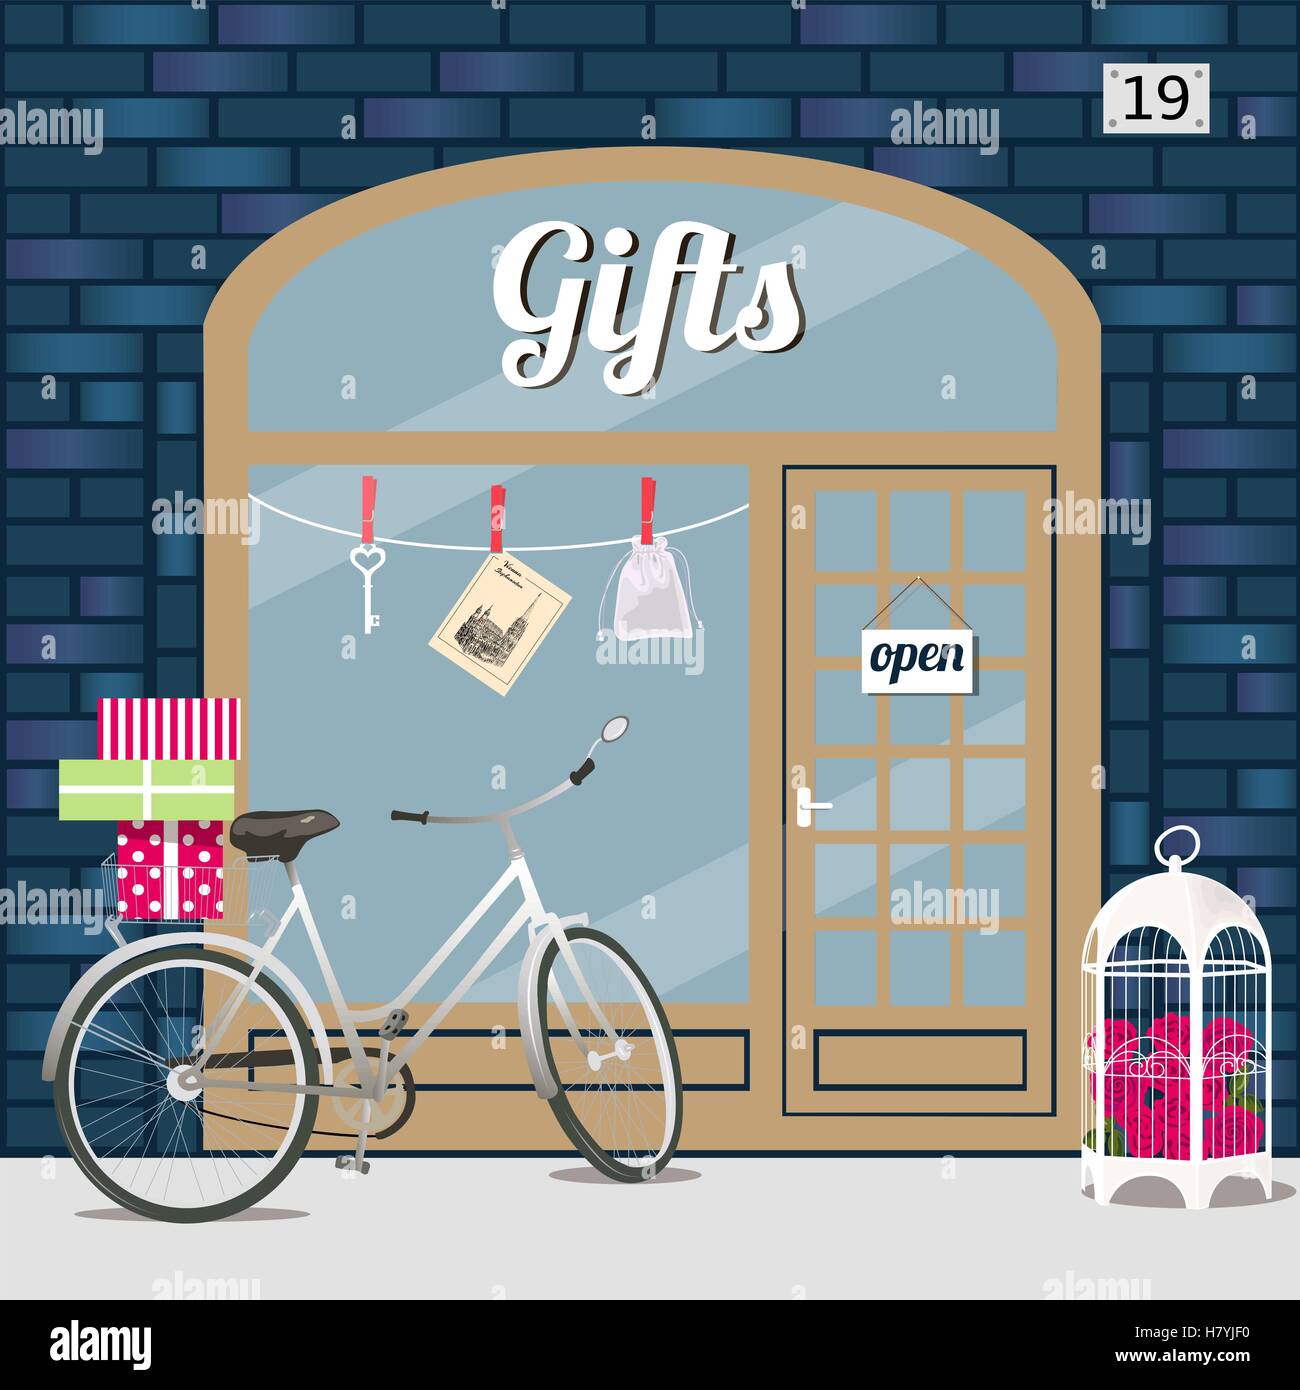 Gifts shop. Stock Vector